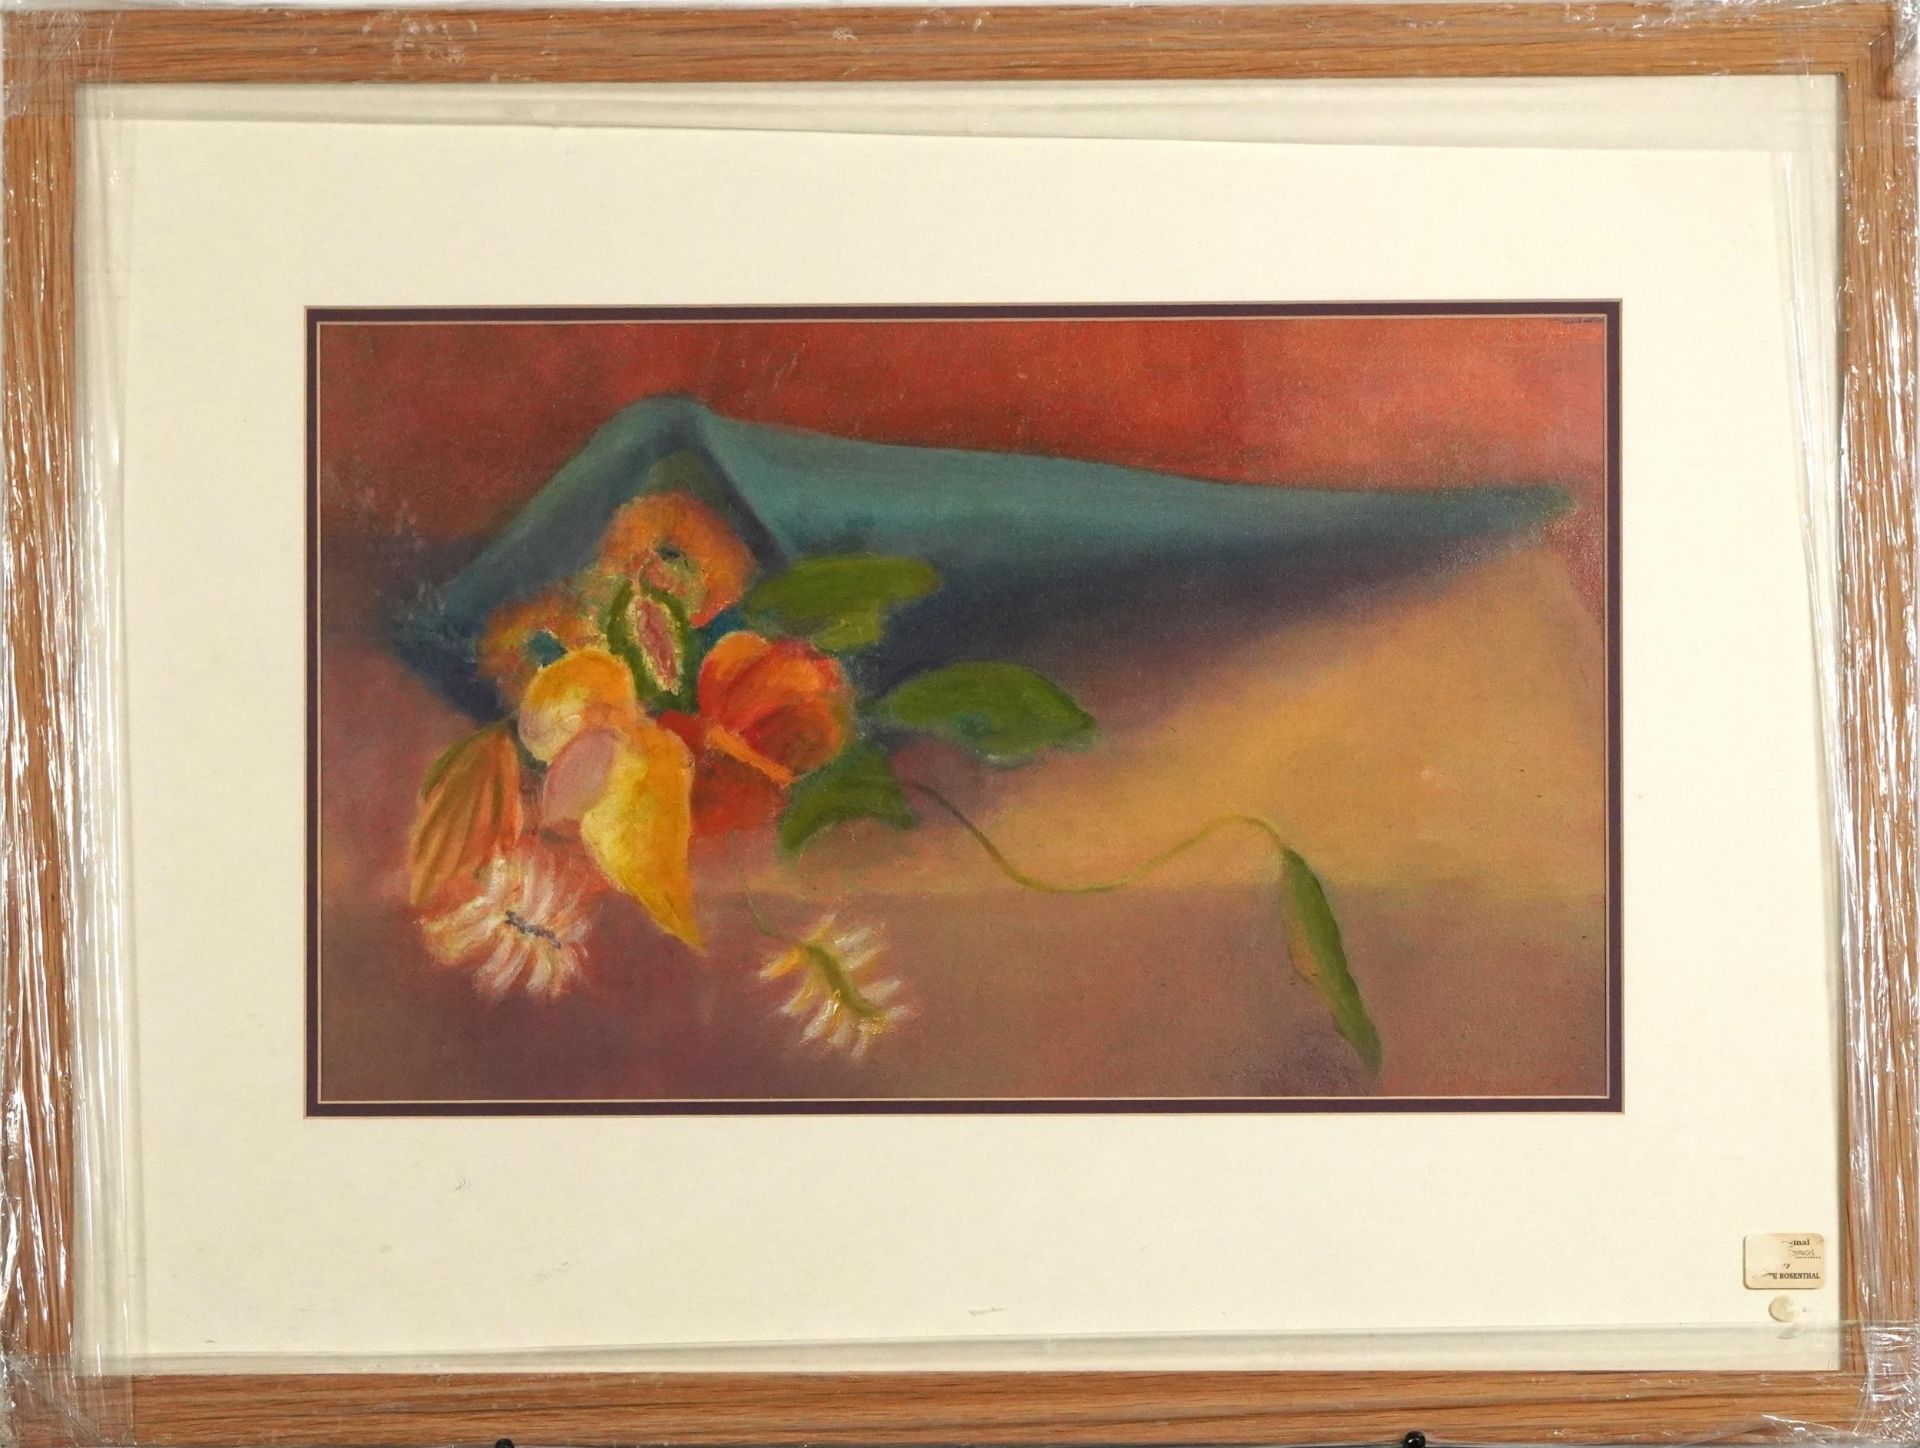 J Rosenthal - Abstract composition, still life flowers, mounted, framed and glazed, 52cm x 31cm - Image 2 of 4